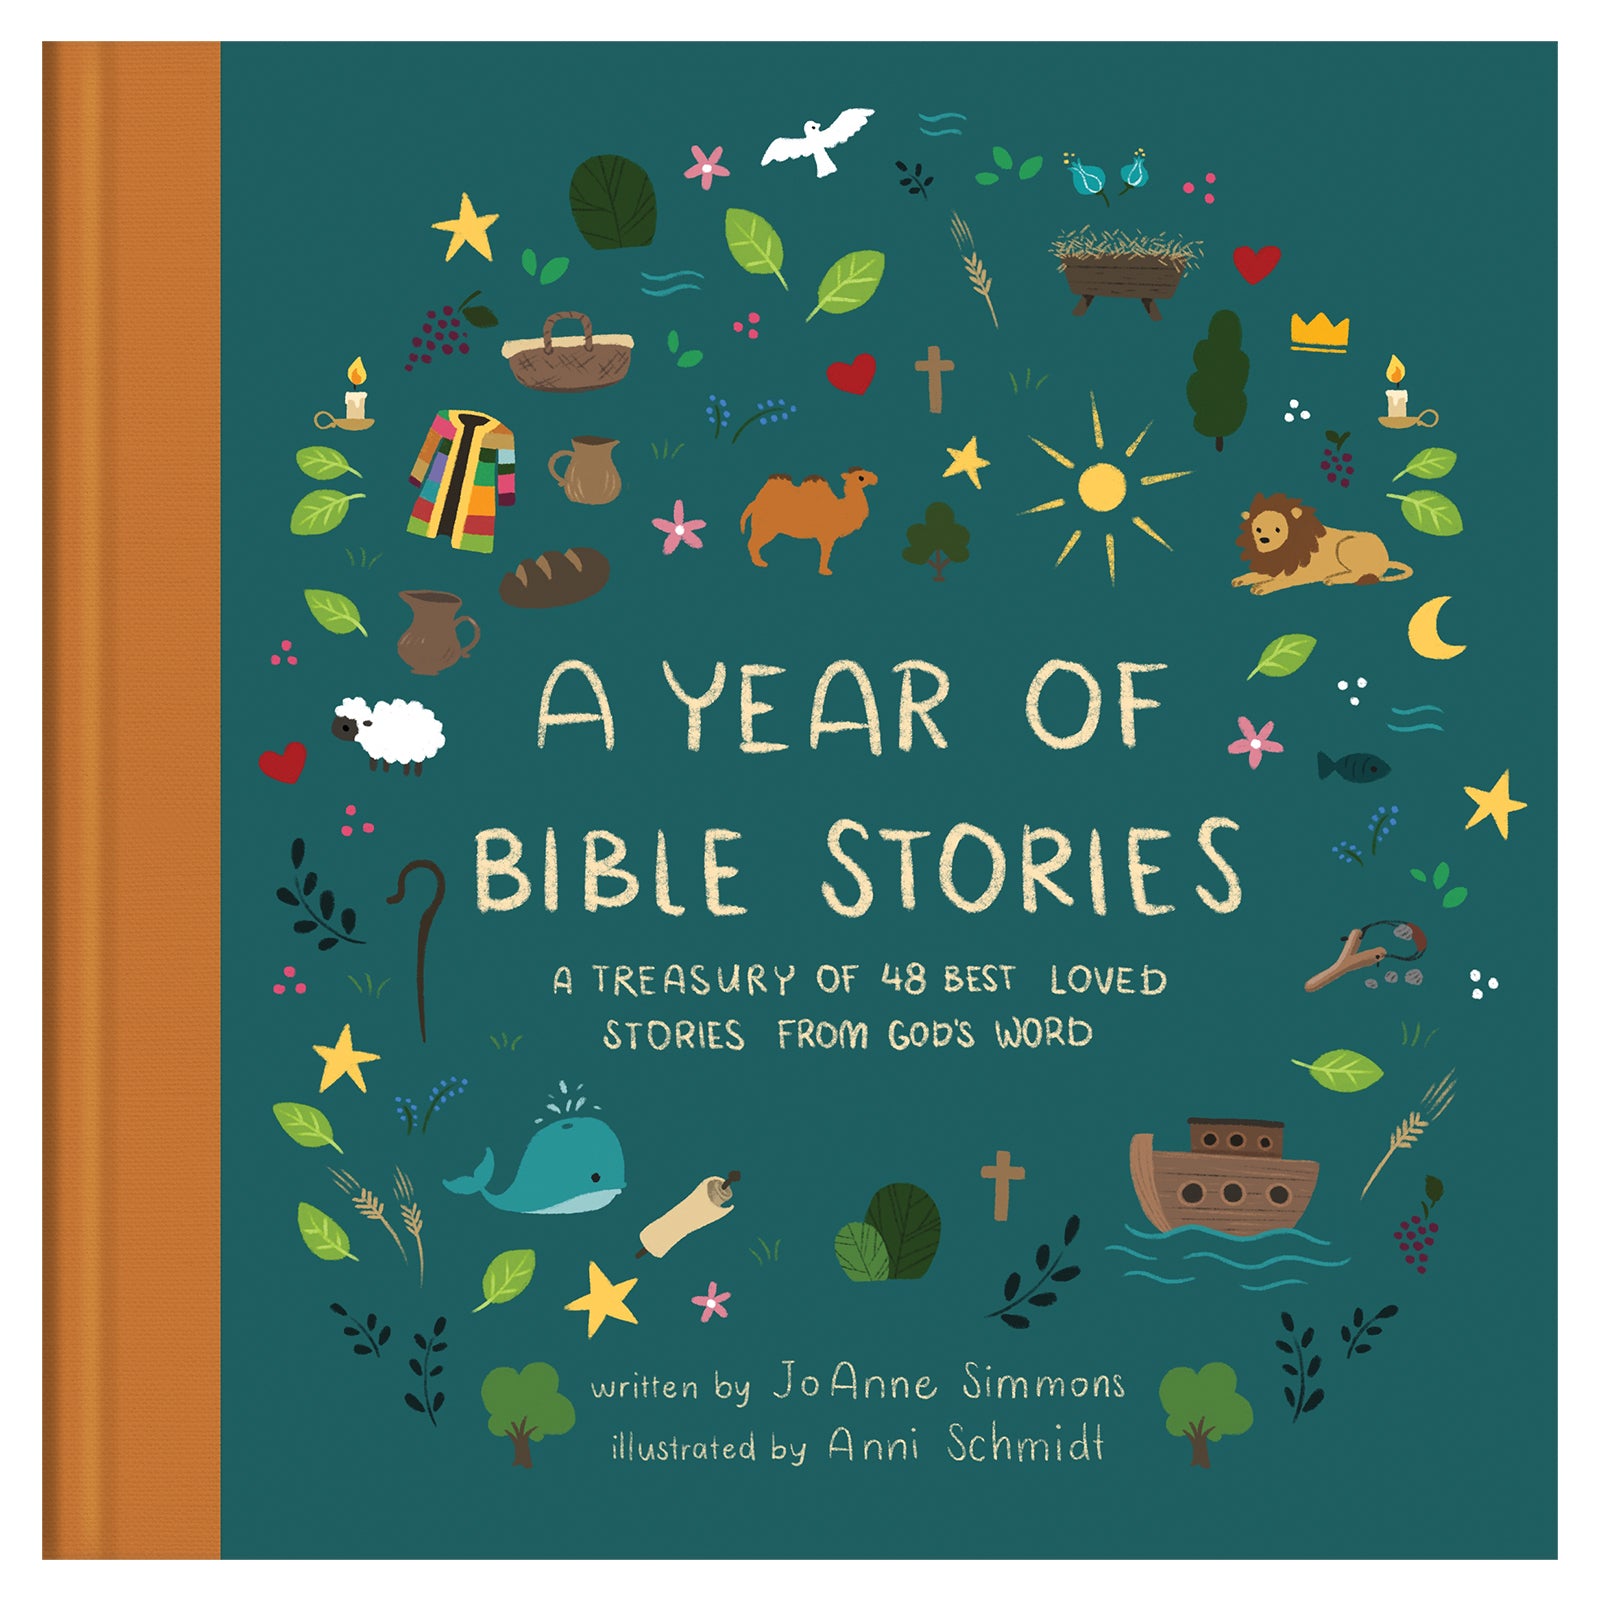 A Year of Bible Stories - Mercantile Mountain